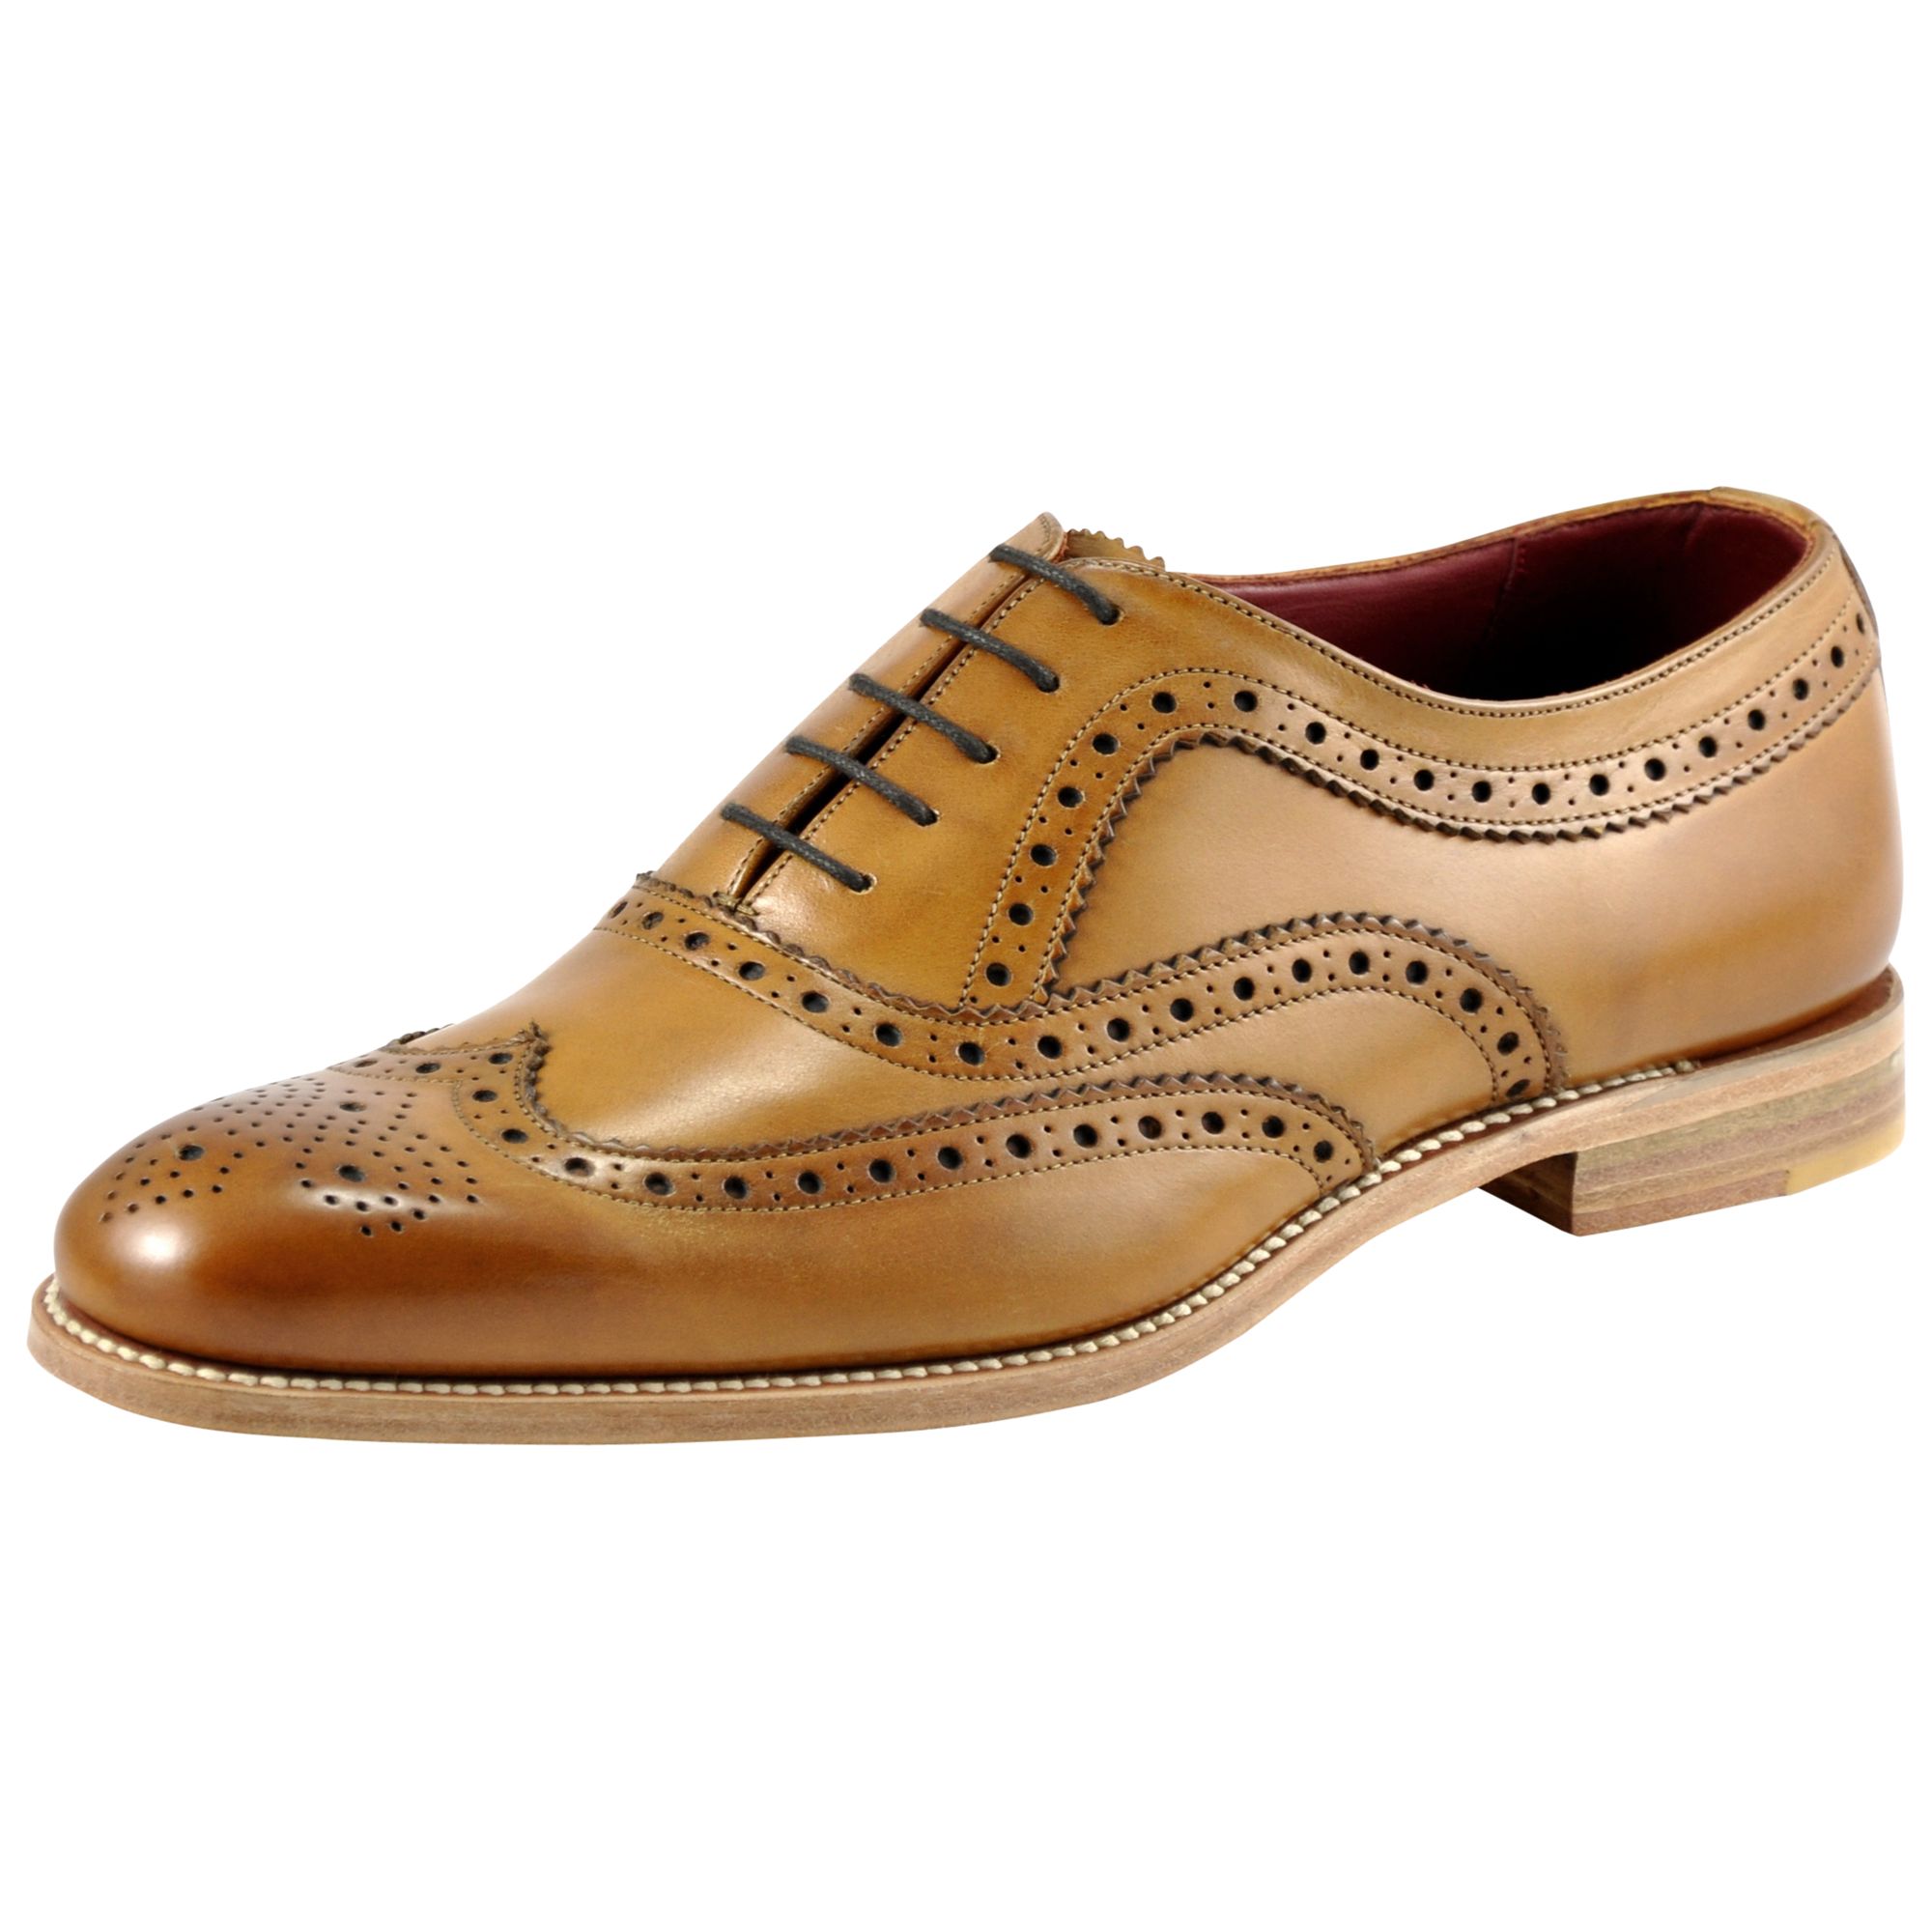 Loake Fearnley Brogue Oxford Shoes, Tan